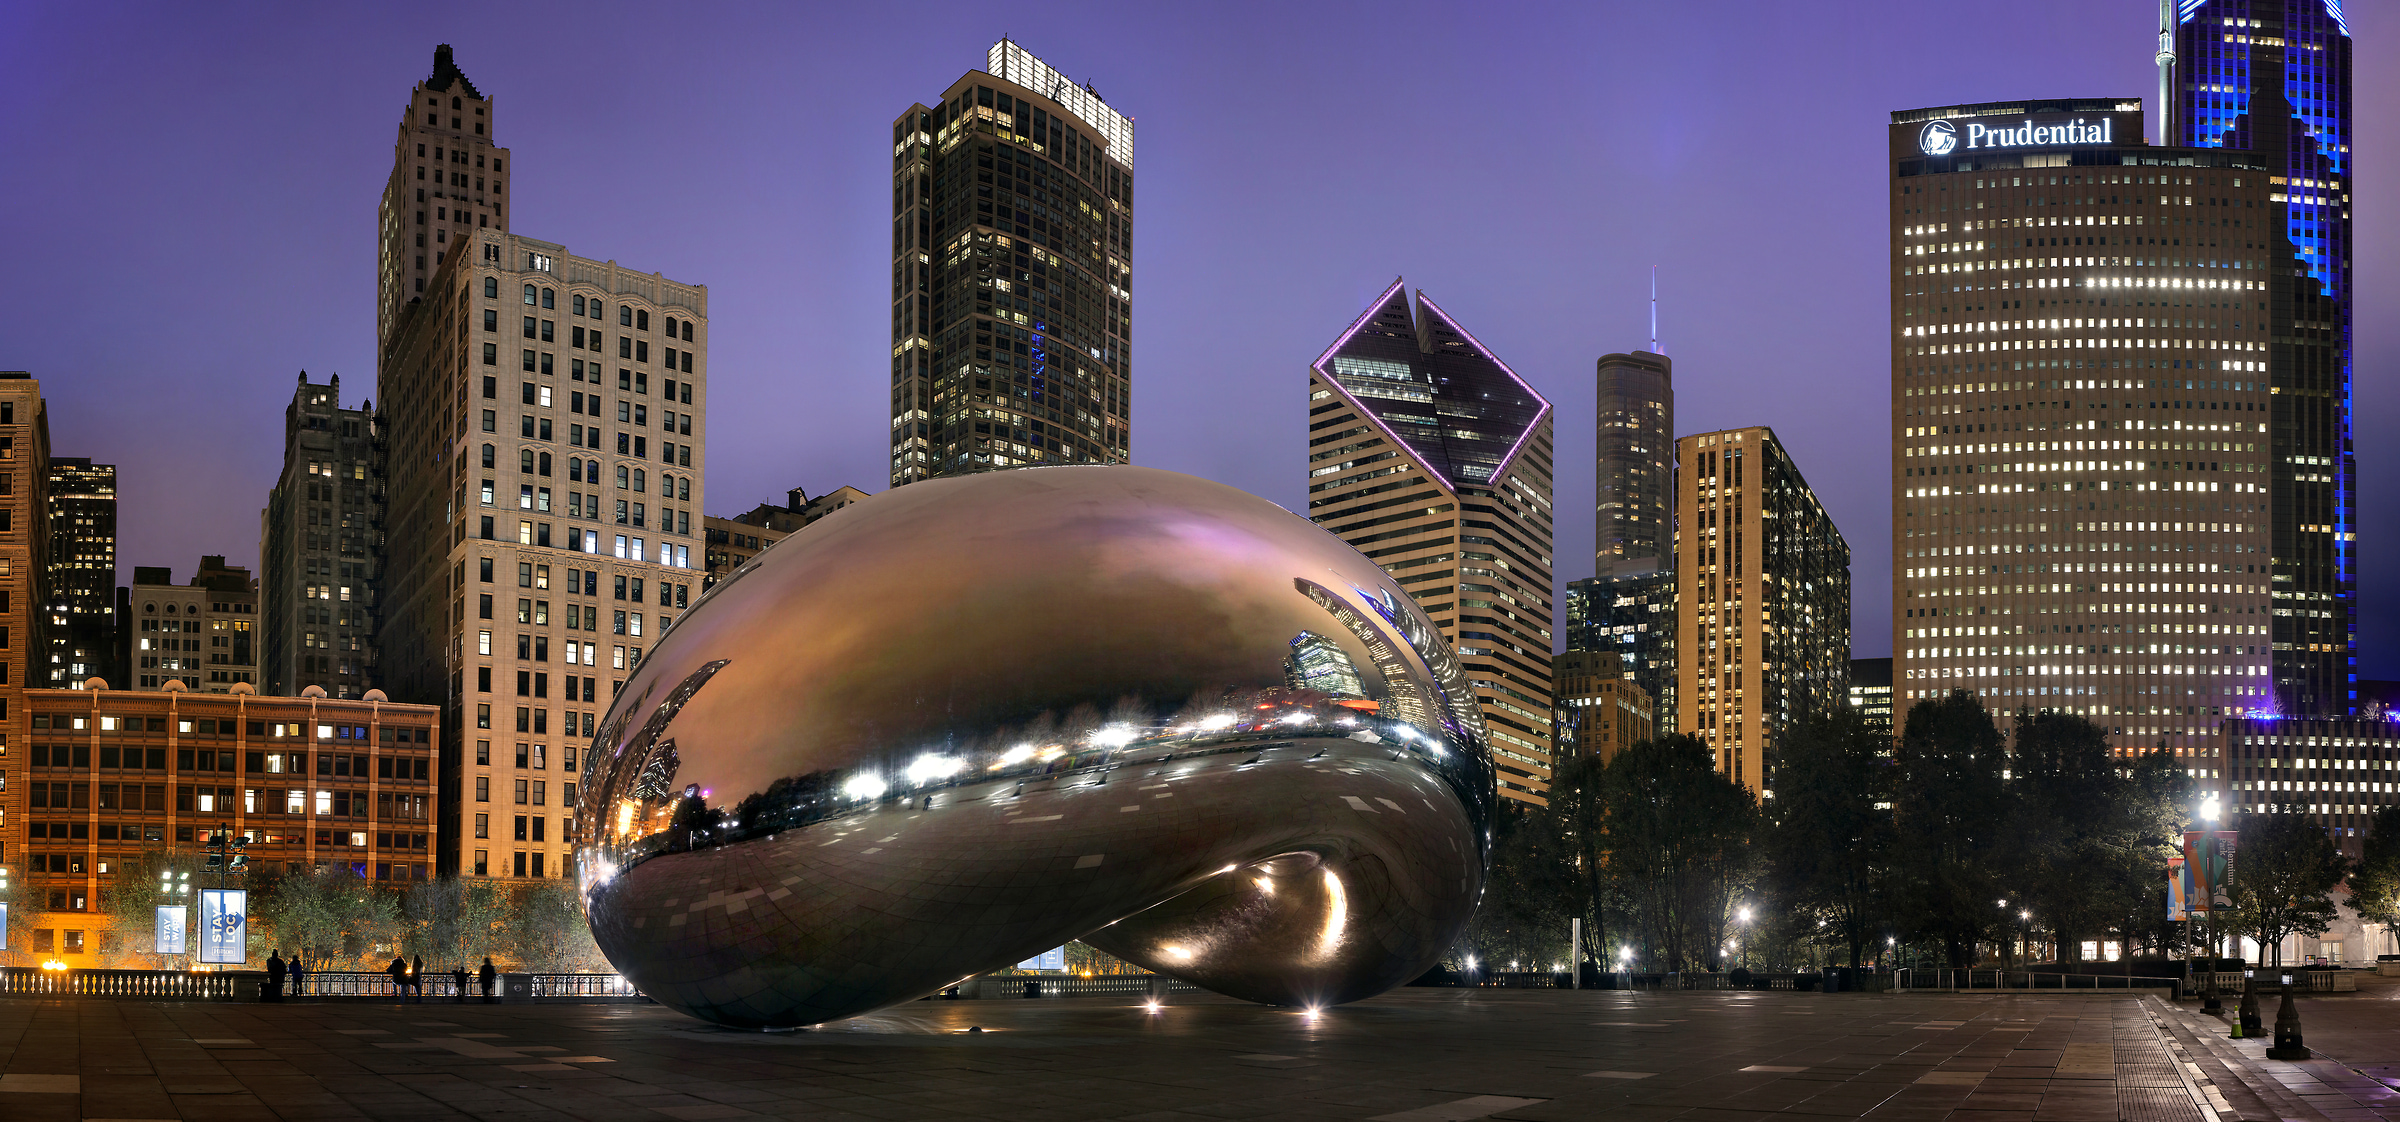 262 megapixels! A very high resolution, large-format VAST photo print of Millennium Park and the Cloud Gate (Chicago Bean) sculpture at night; photograph created by Phil Crawshay in Chicago, Illinois.